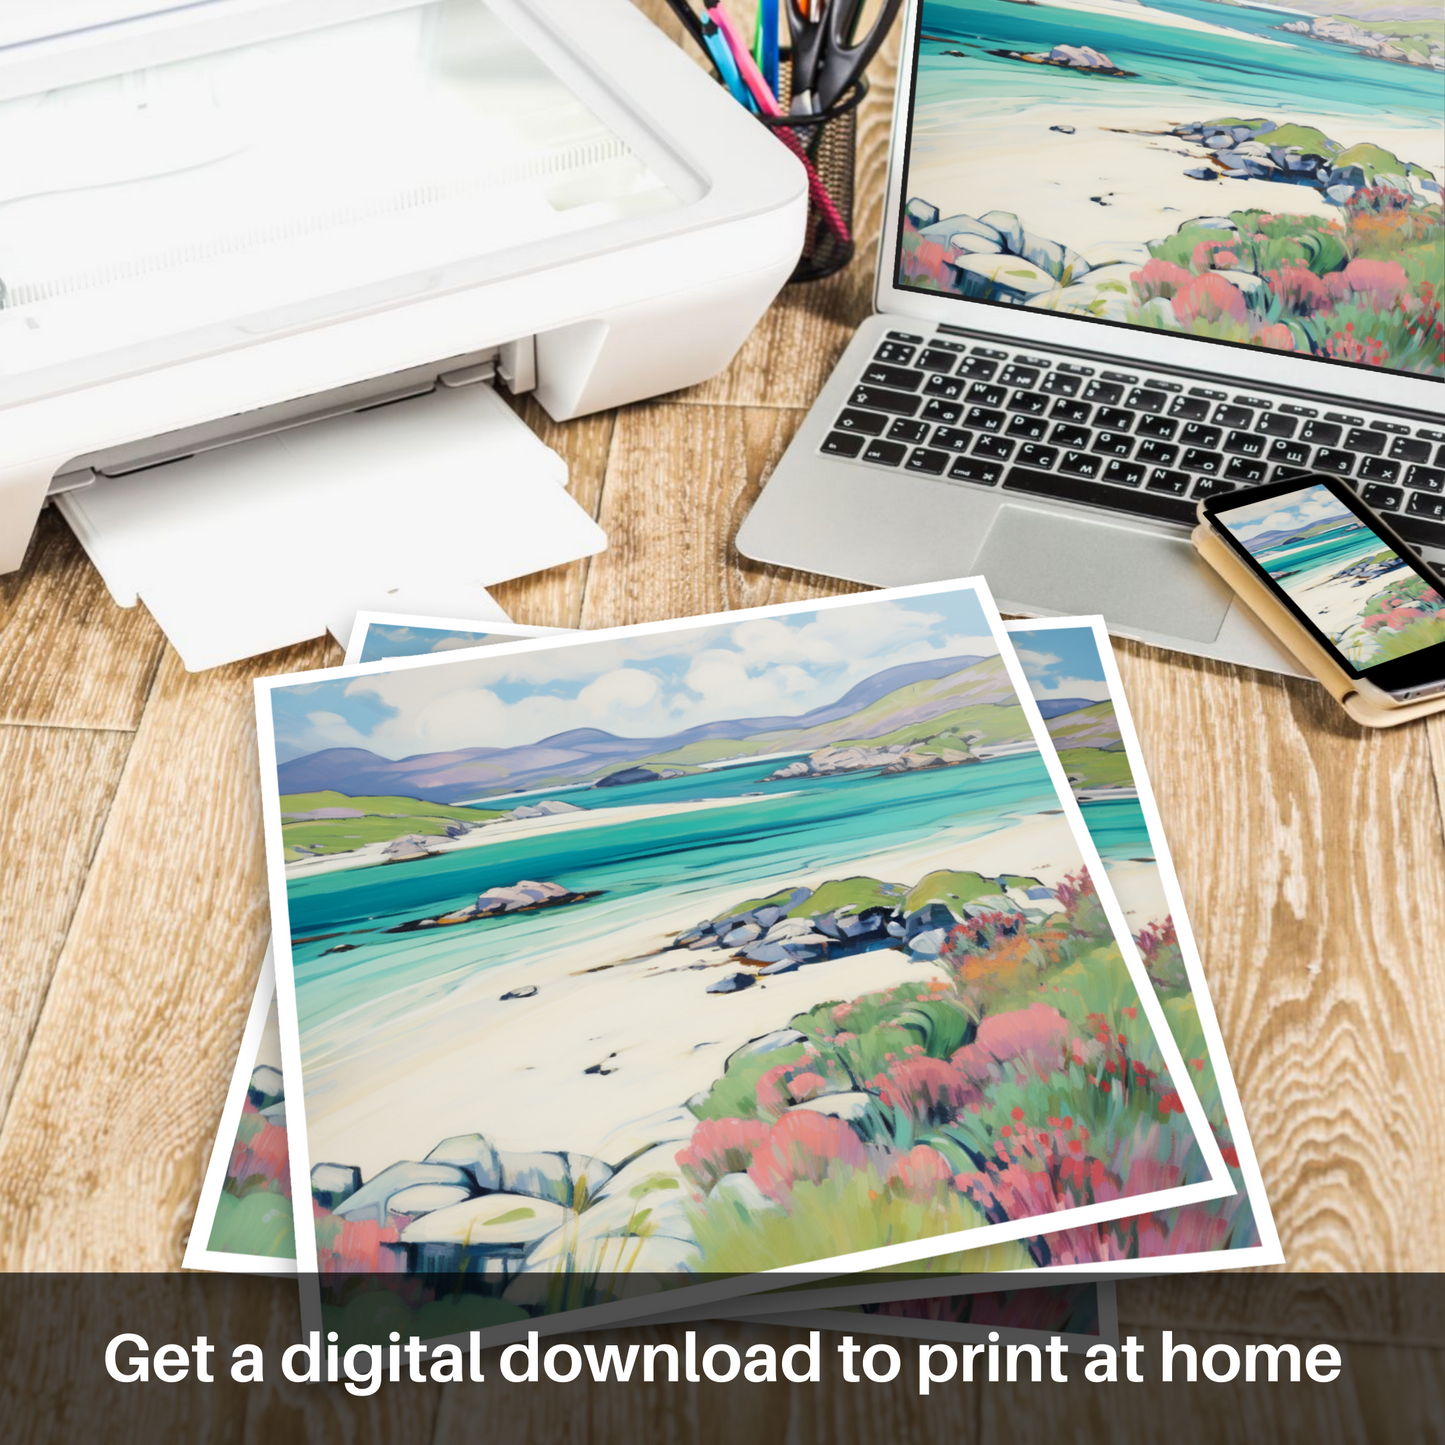 Downloadable and printable picture of Isle of Harris, Outer Hebrides in summer